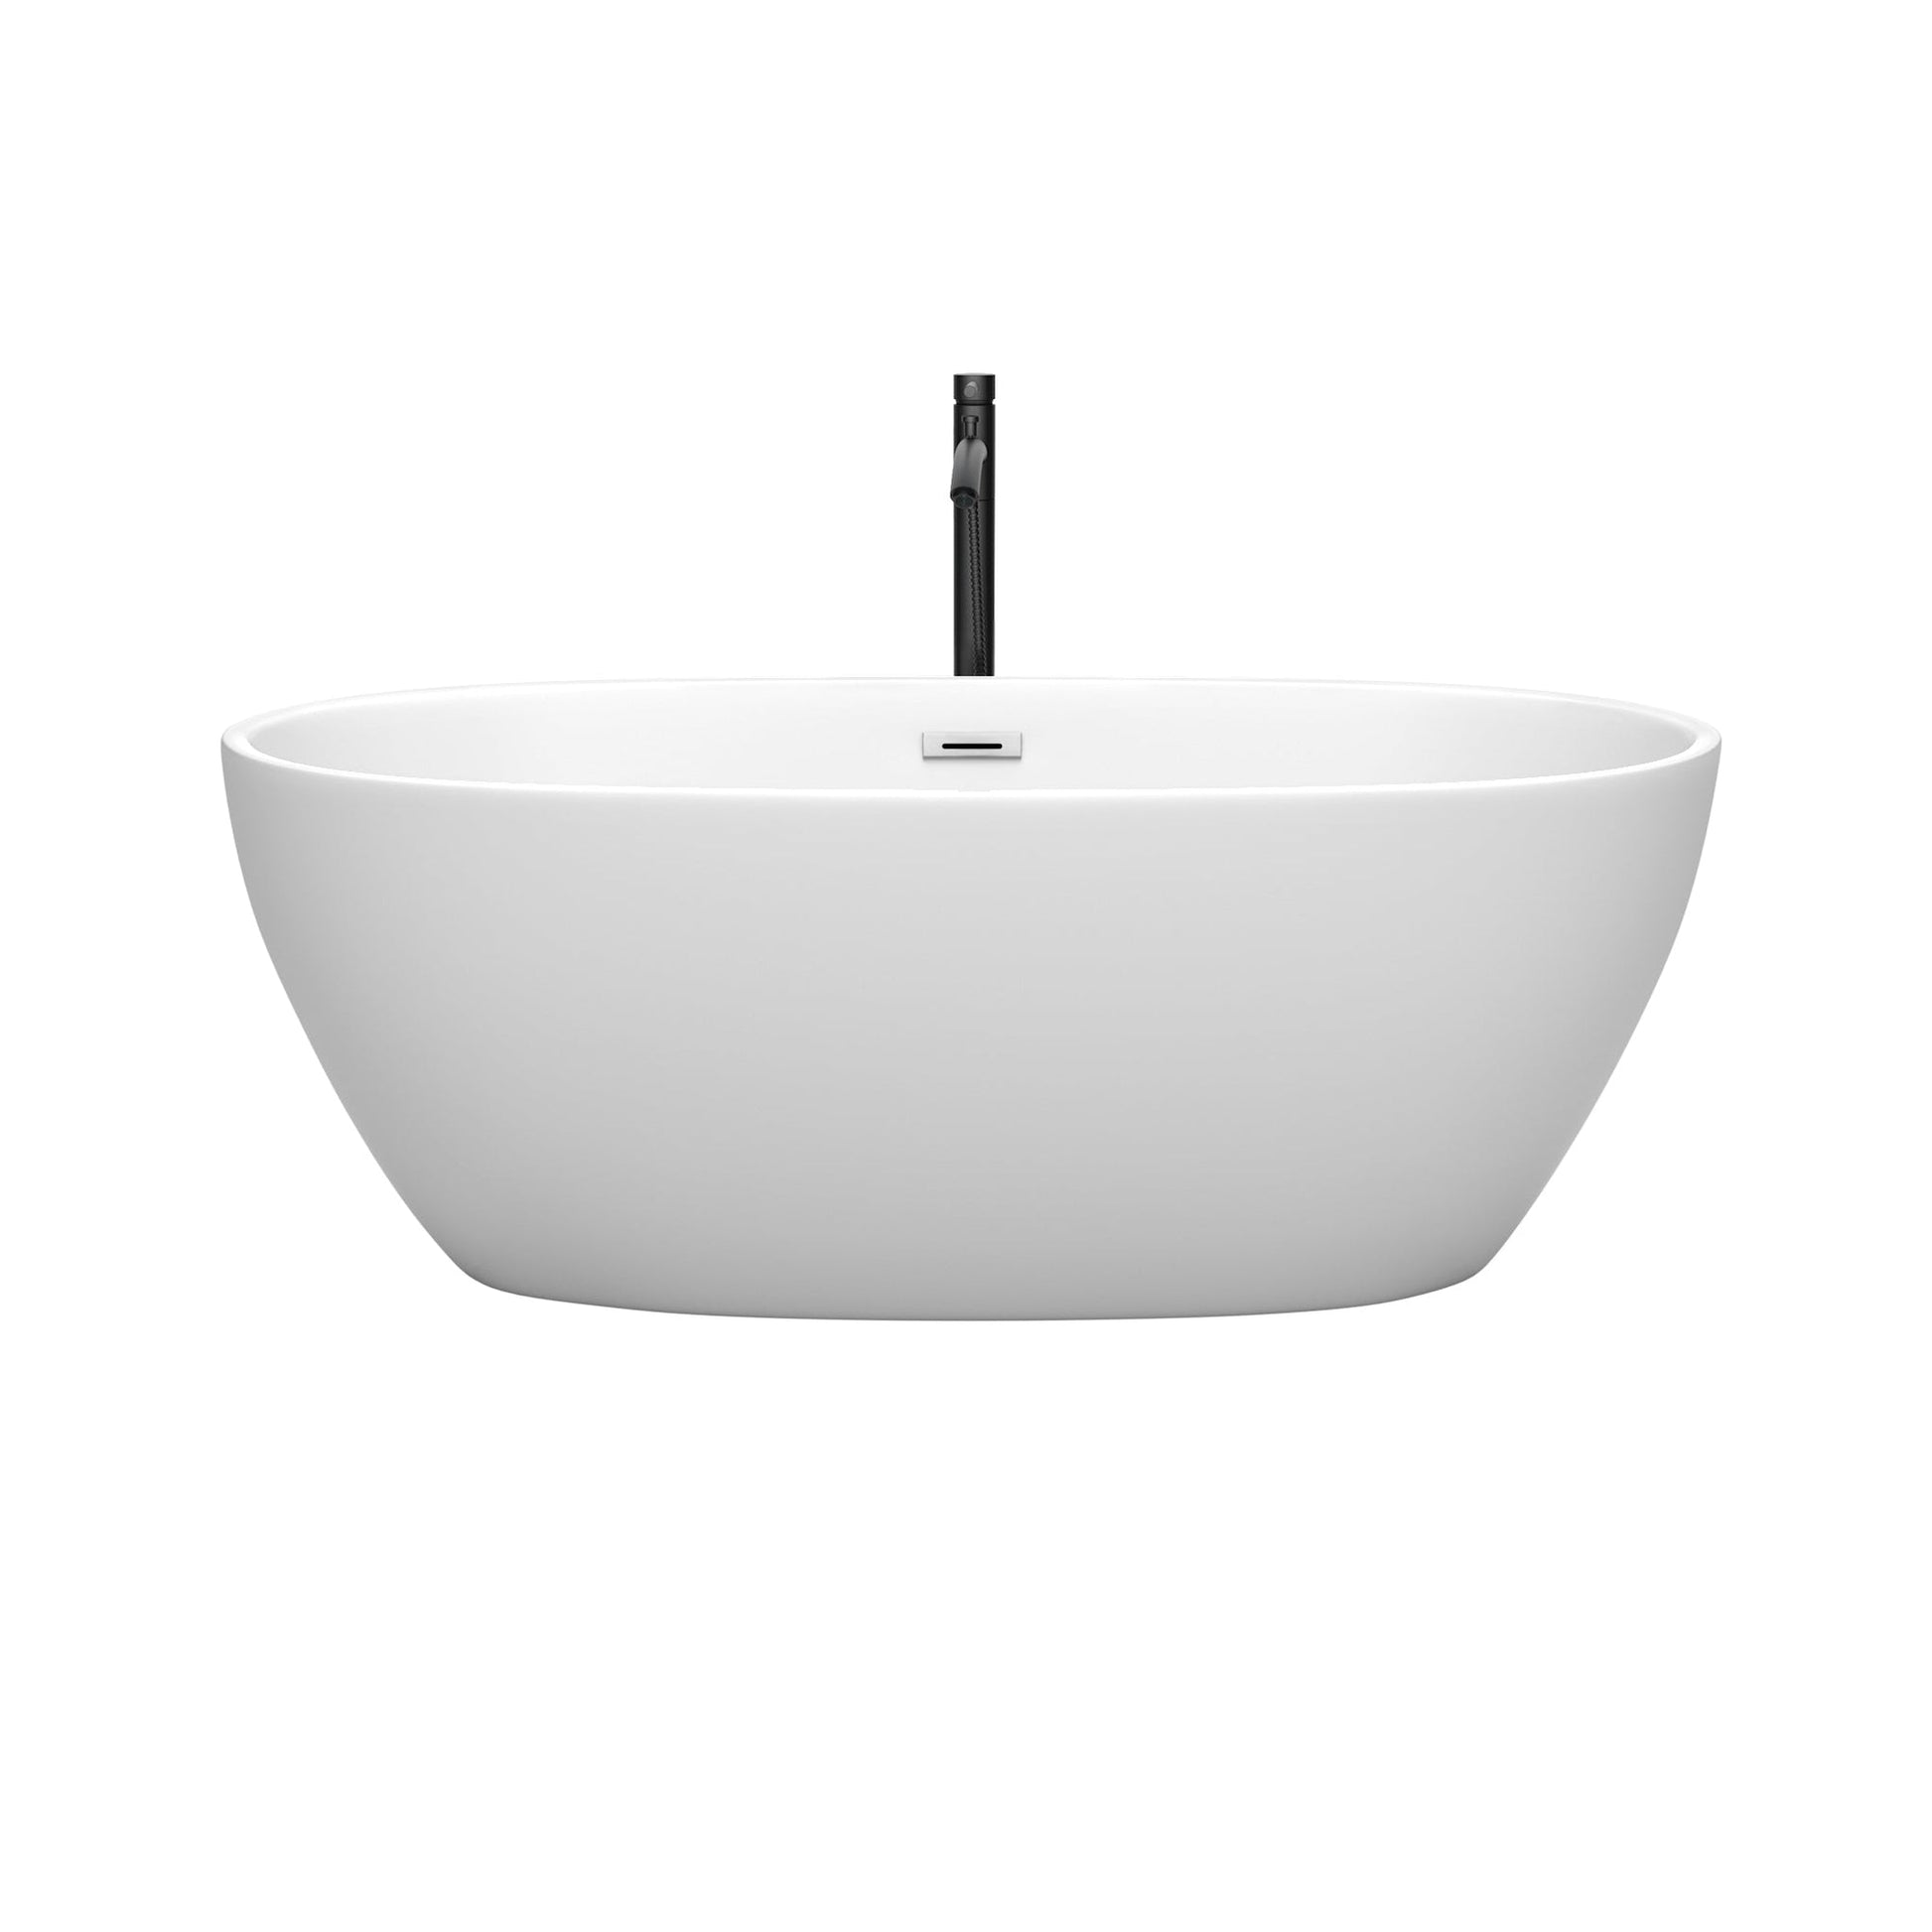 Wyndham Collection Juno 63" Freestanding Bathtub in Matte White With Polished Chrome Trim and Floor Mounted Faucet in Matte Black